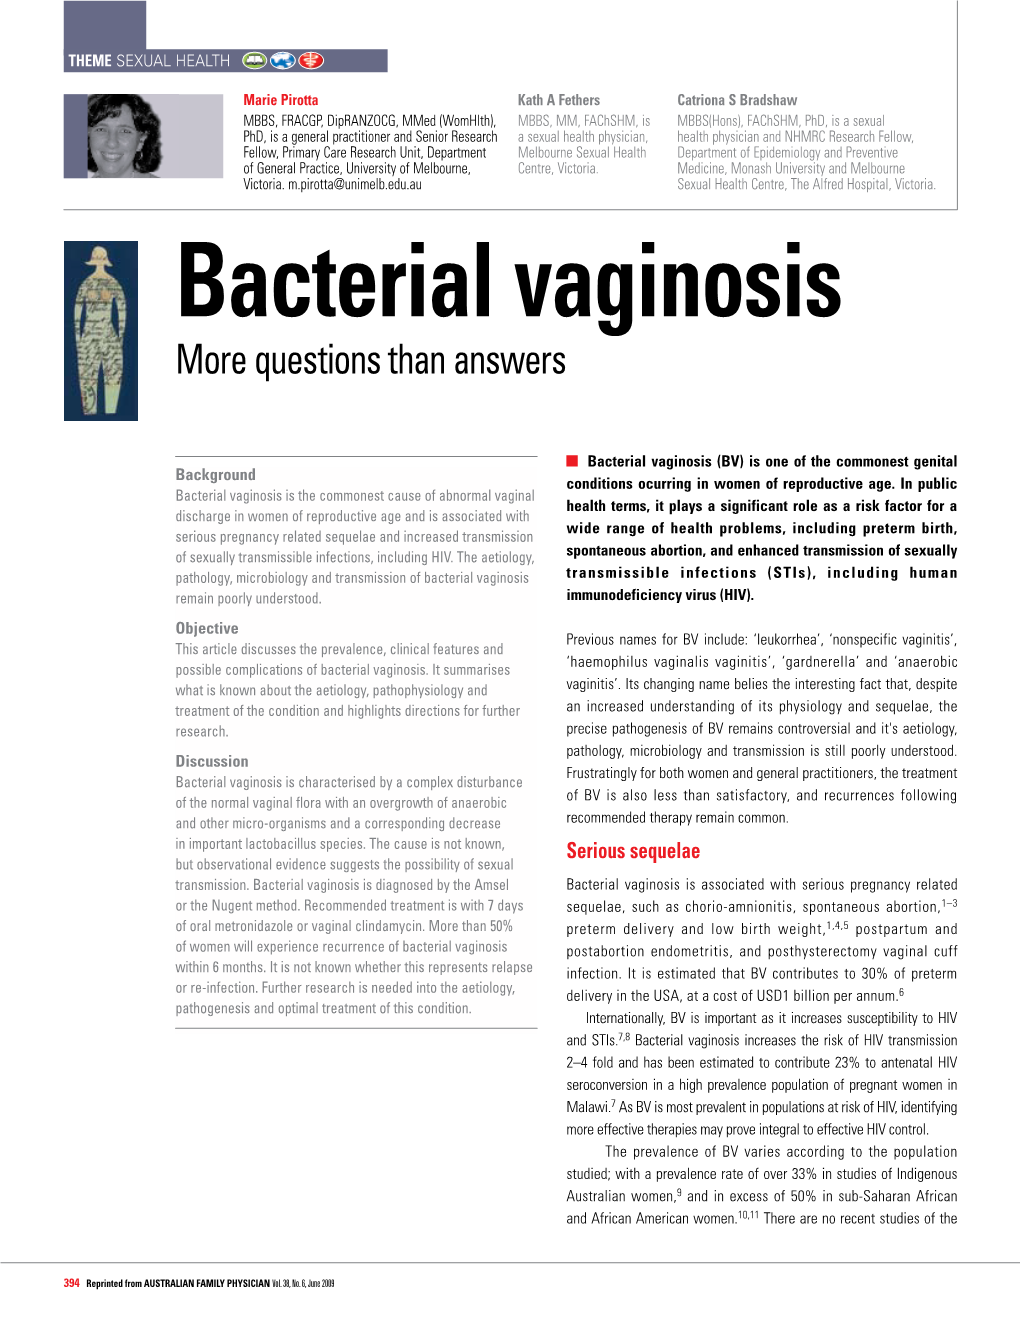 Bacterial Vaginosis – More Questions Than Answers